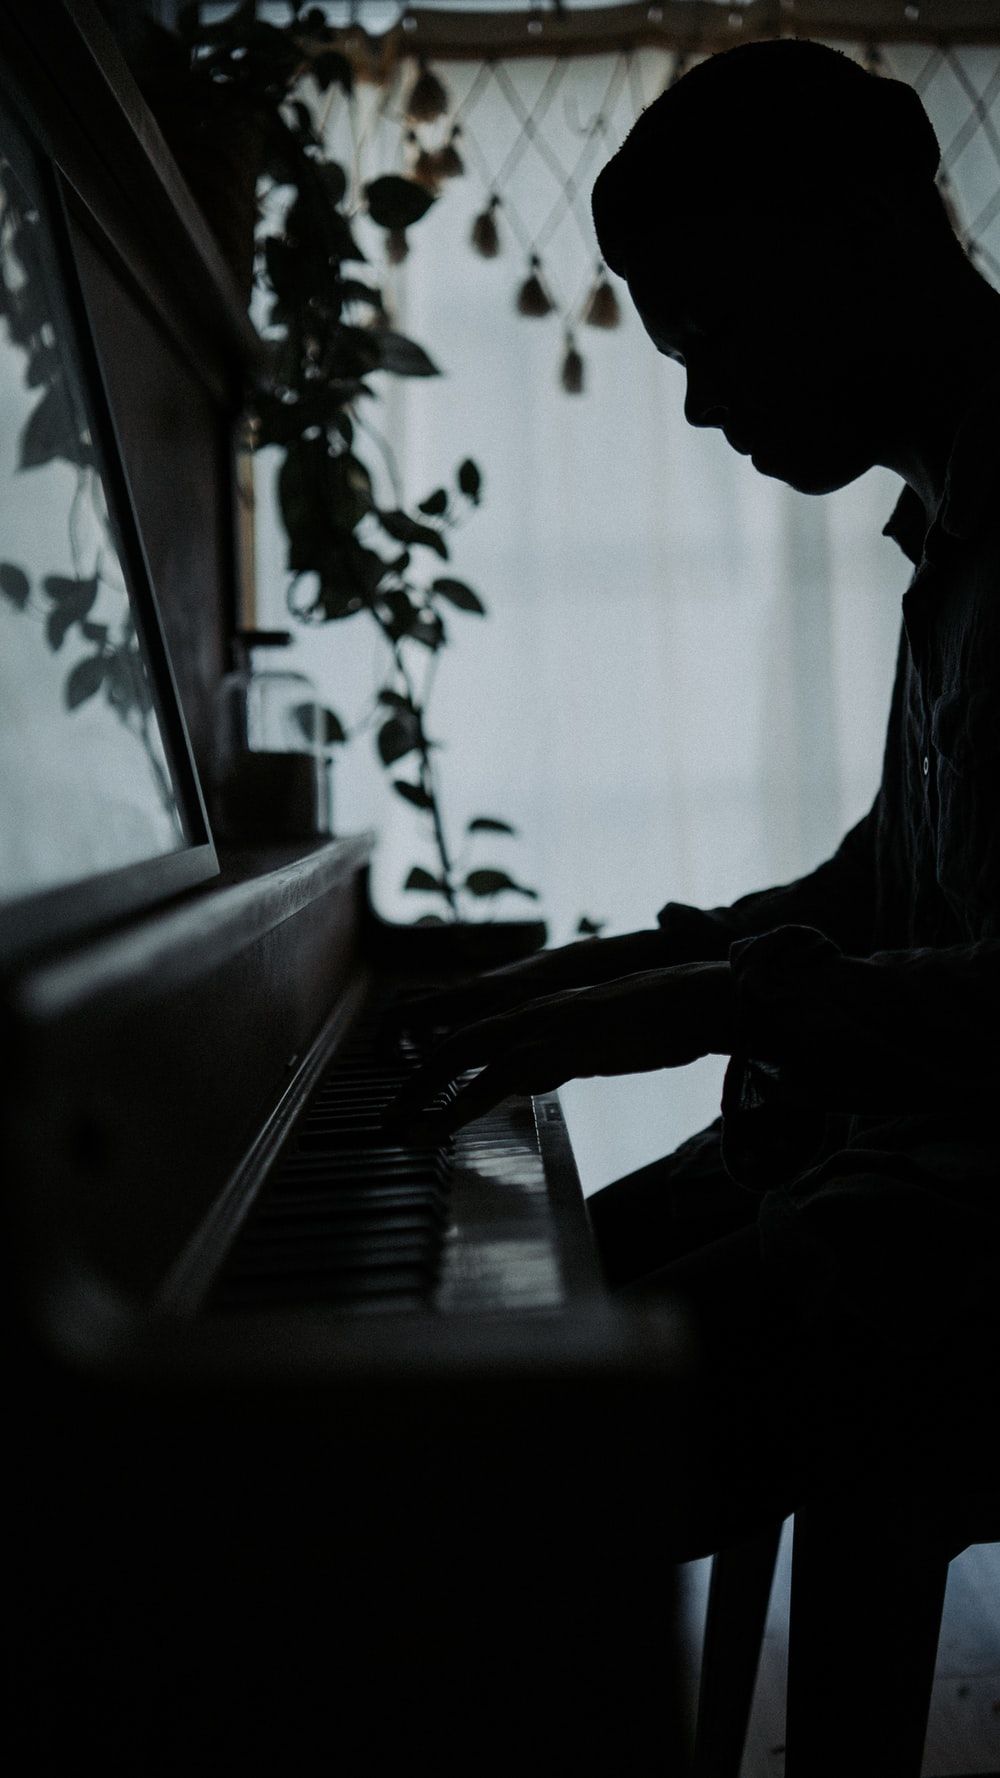 Playing Piano Picture. Download Free Image